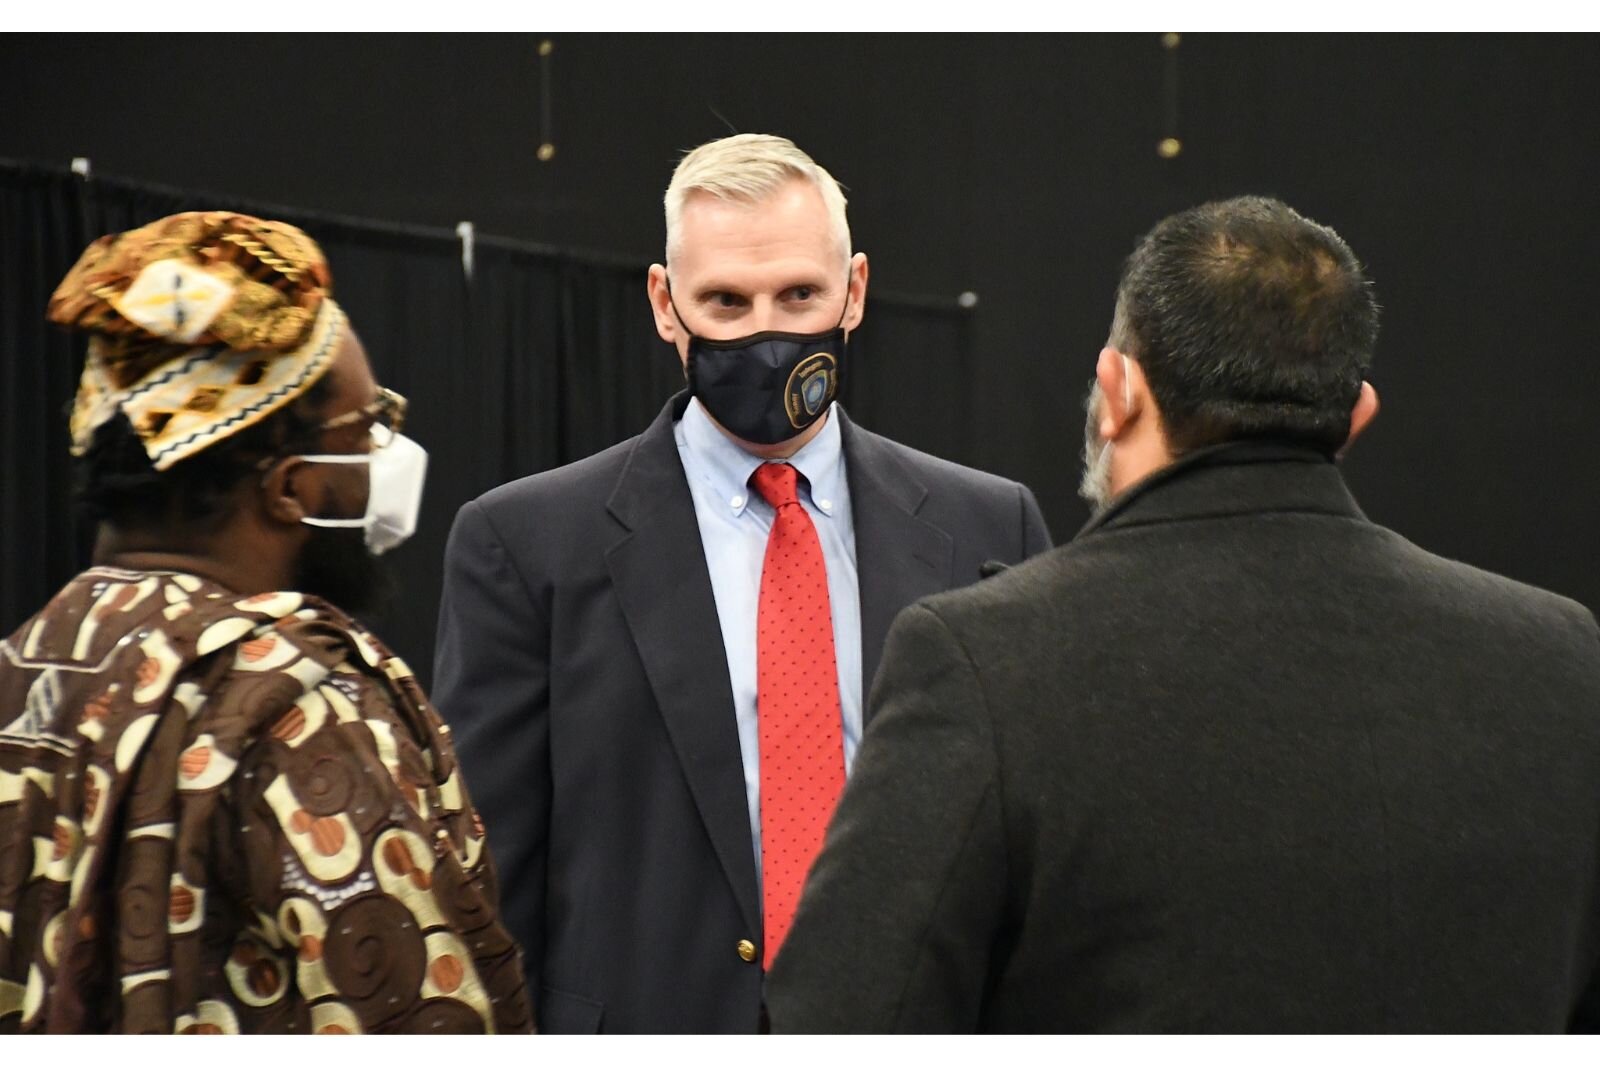 Battle Creek’s Chief of Police Jim Blocker is seen at a Martin Luther King Day event earlier in 2022.